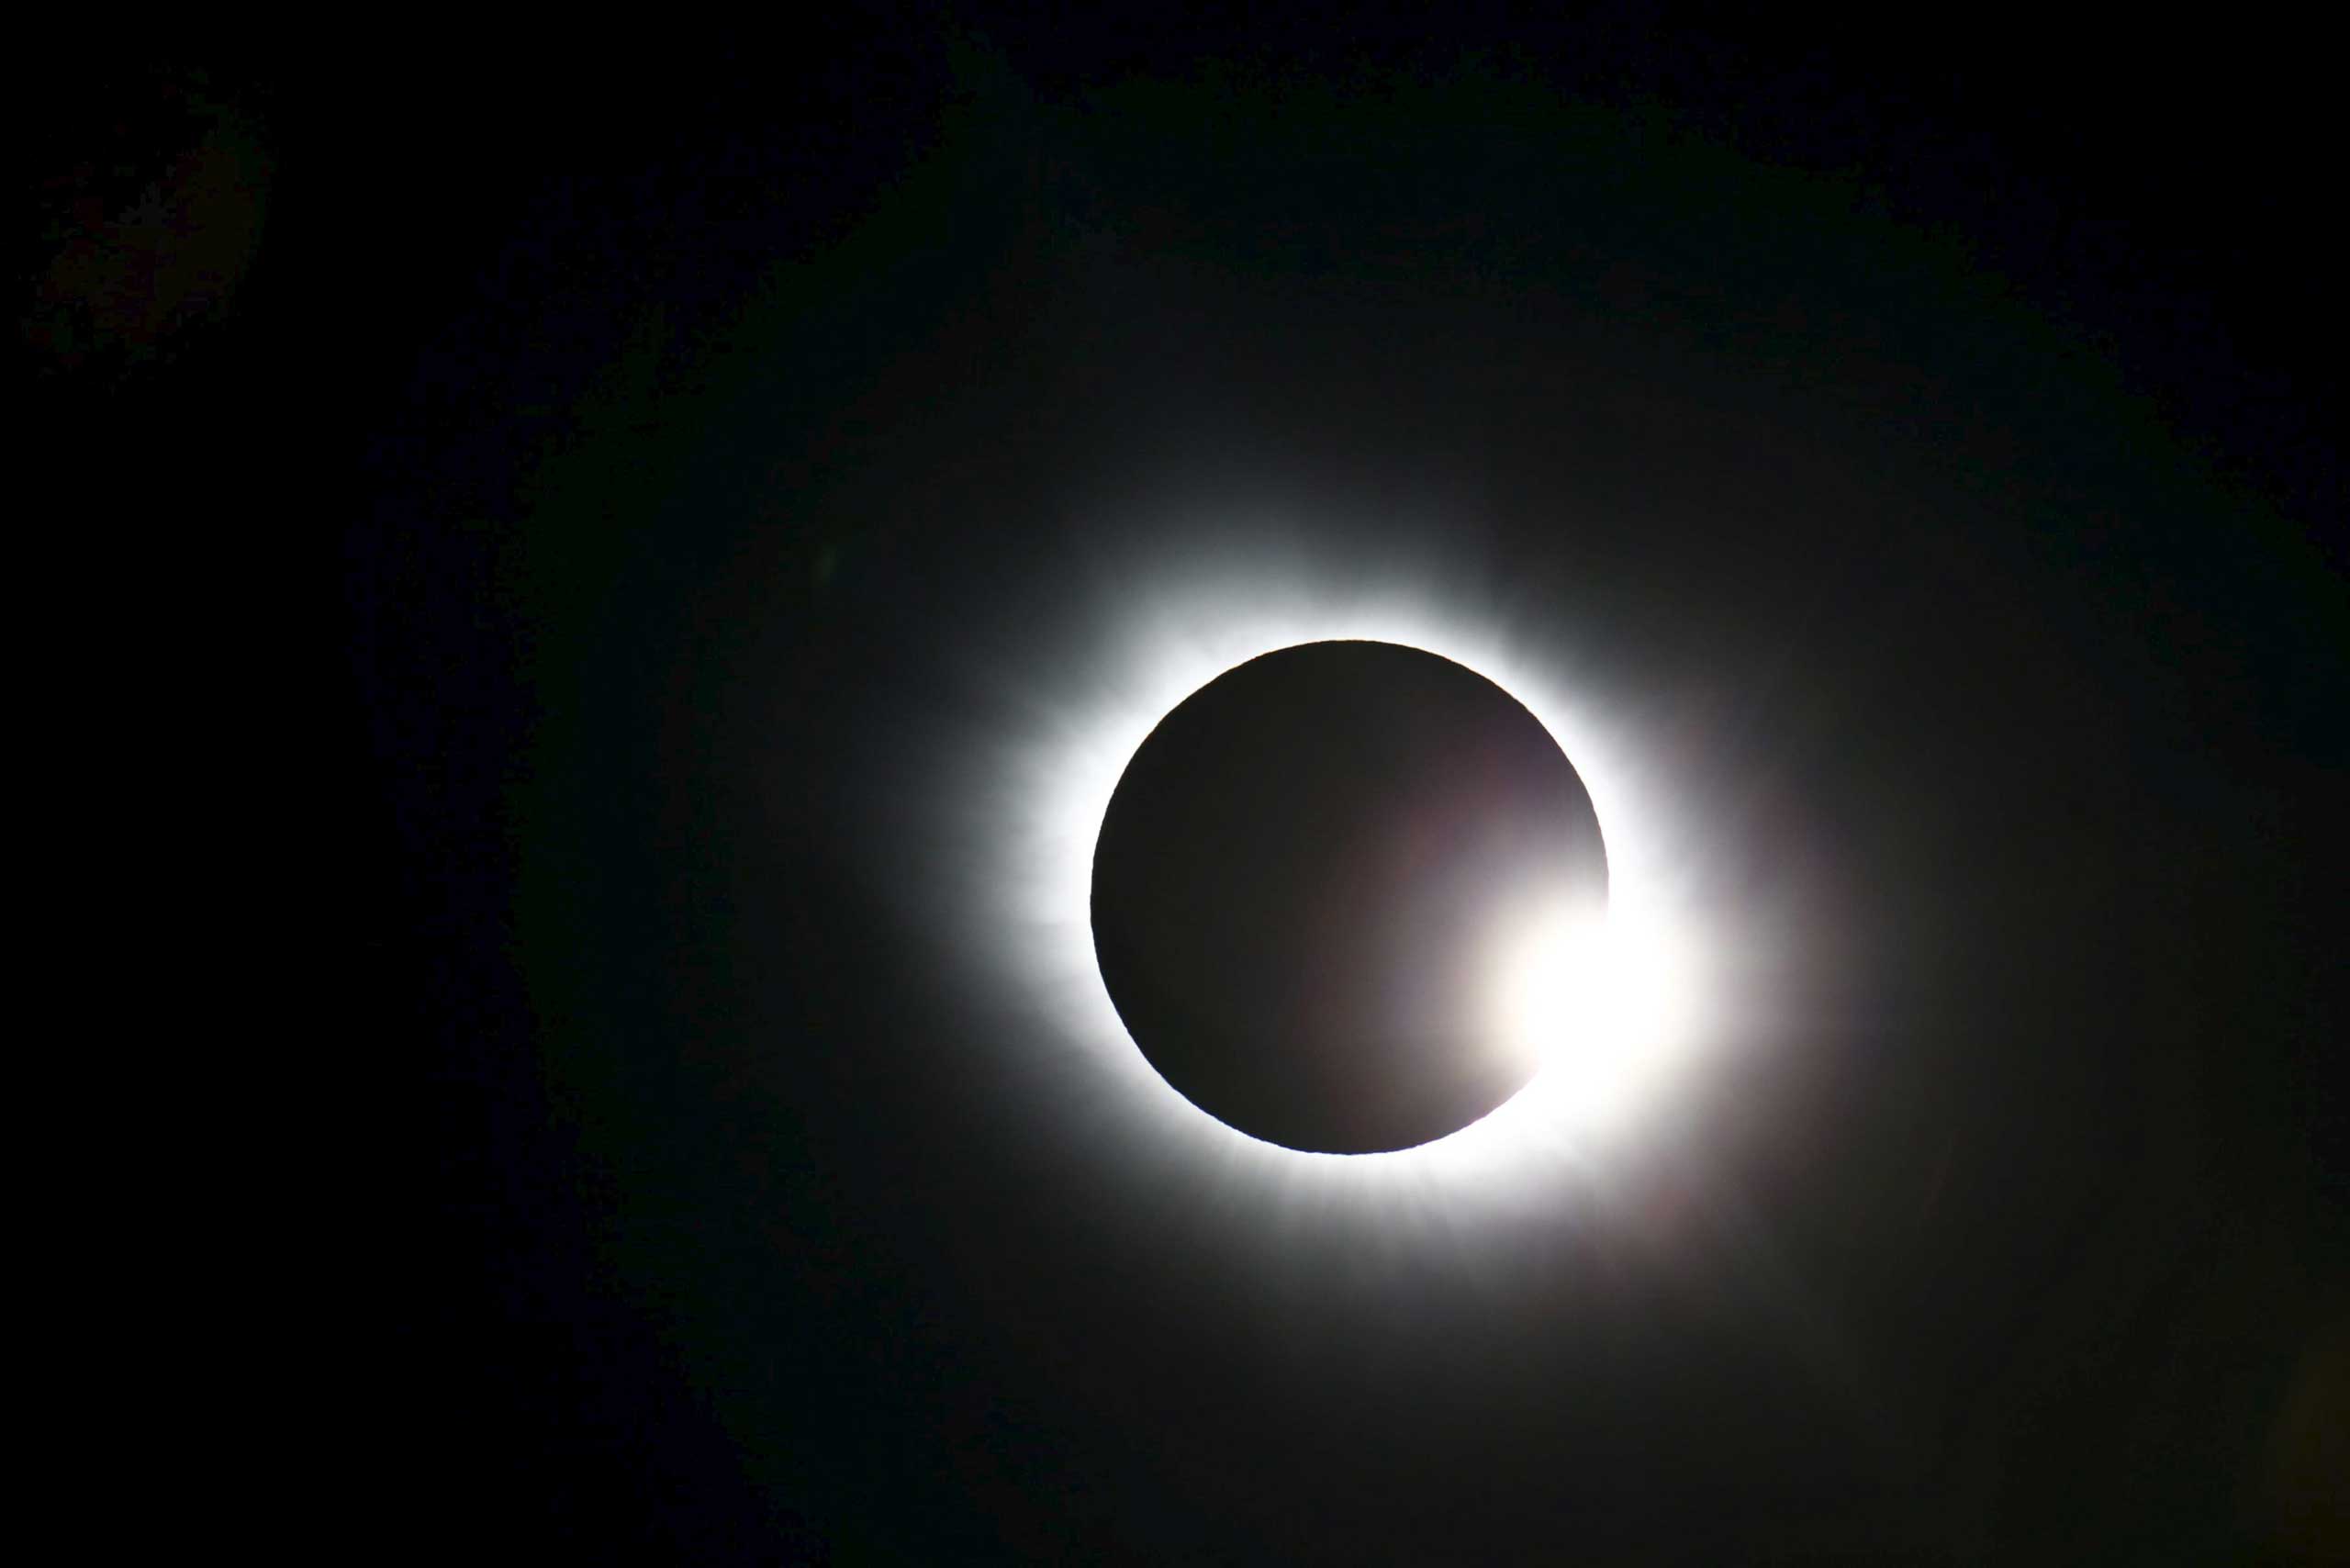 A total solar eclipse occurs over Svalbard, Norway on March 20, 2015.